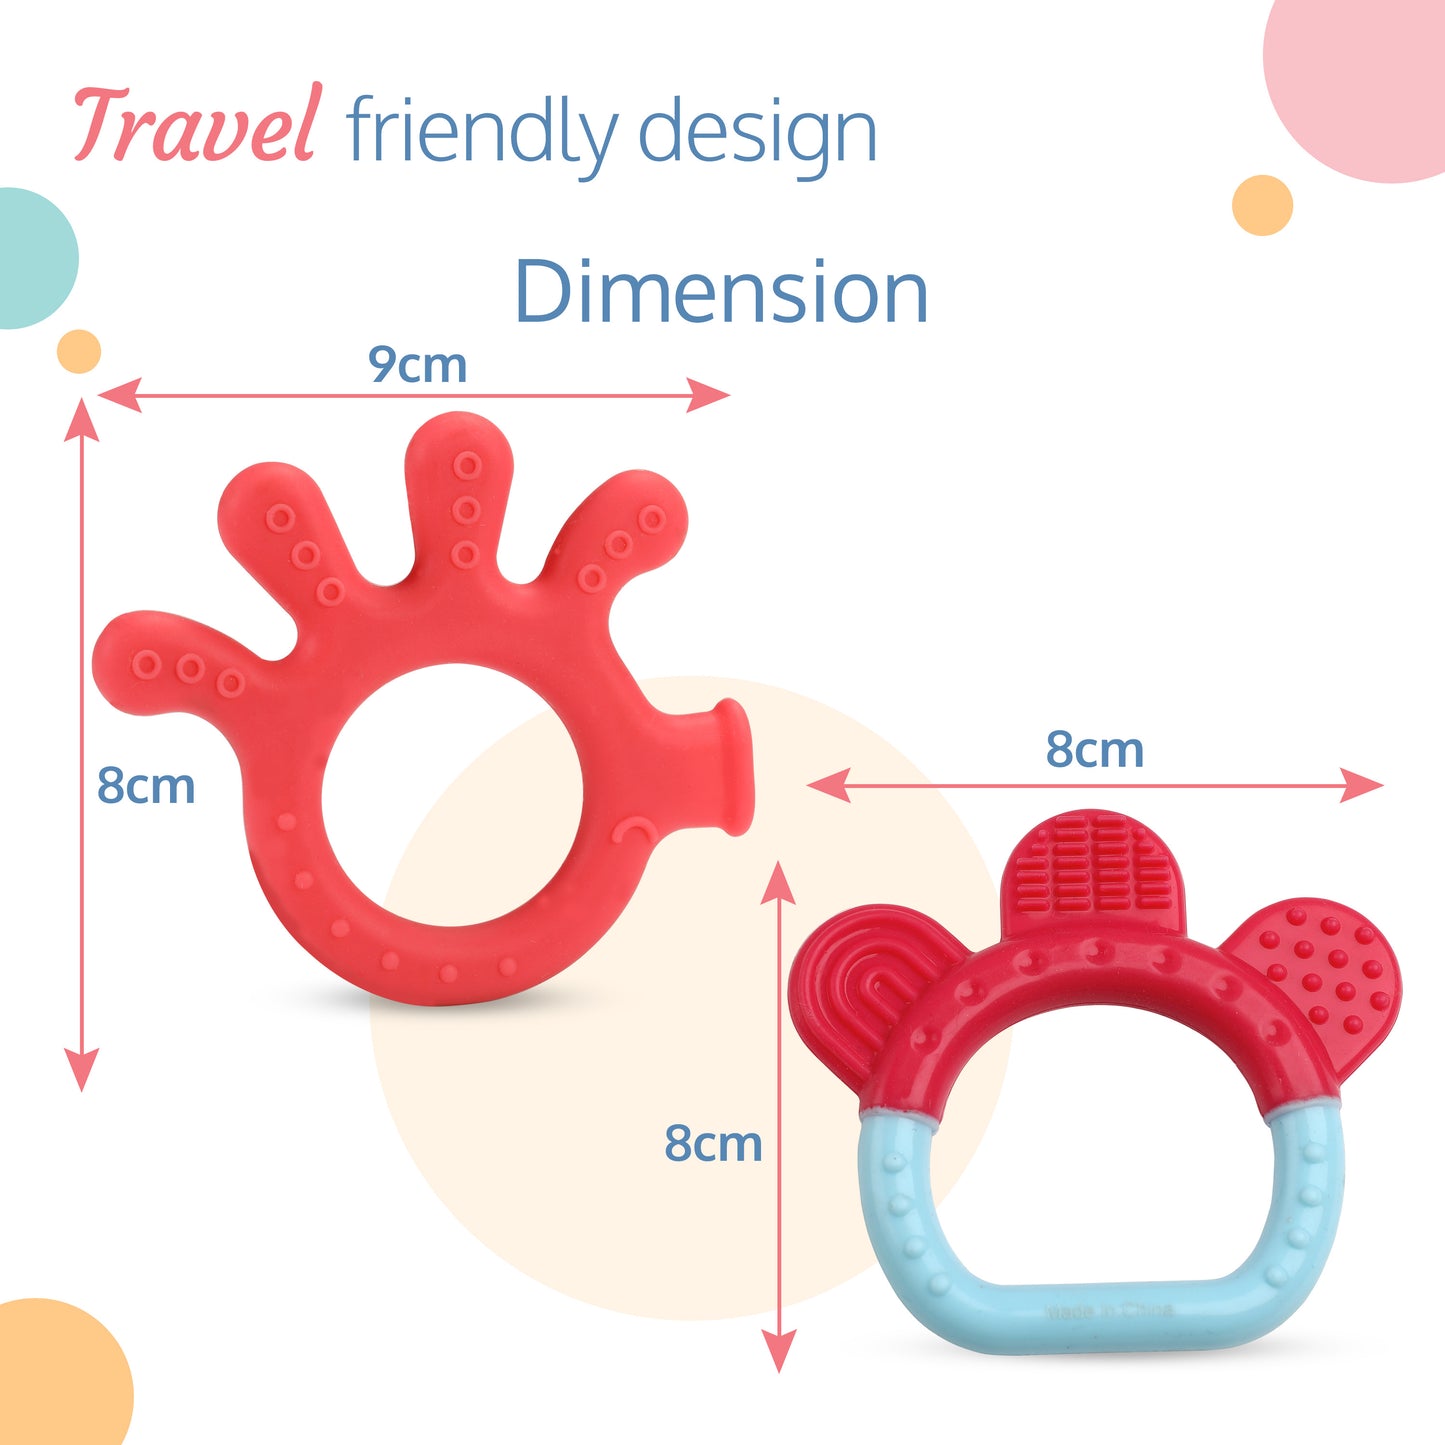 Baby Silicone Teether for teething gums, Finger & Ring